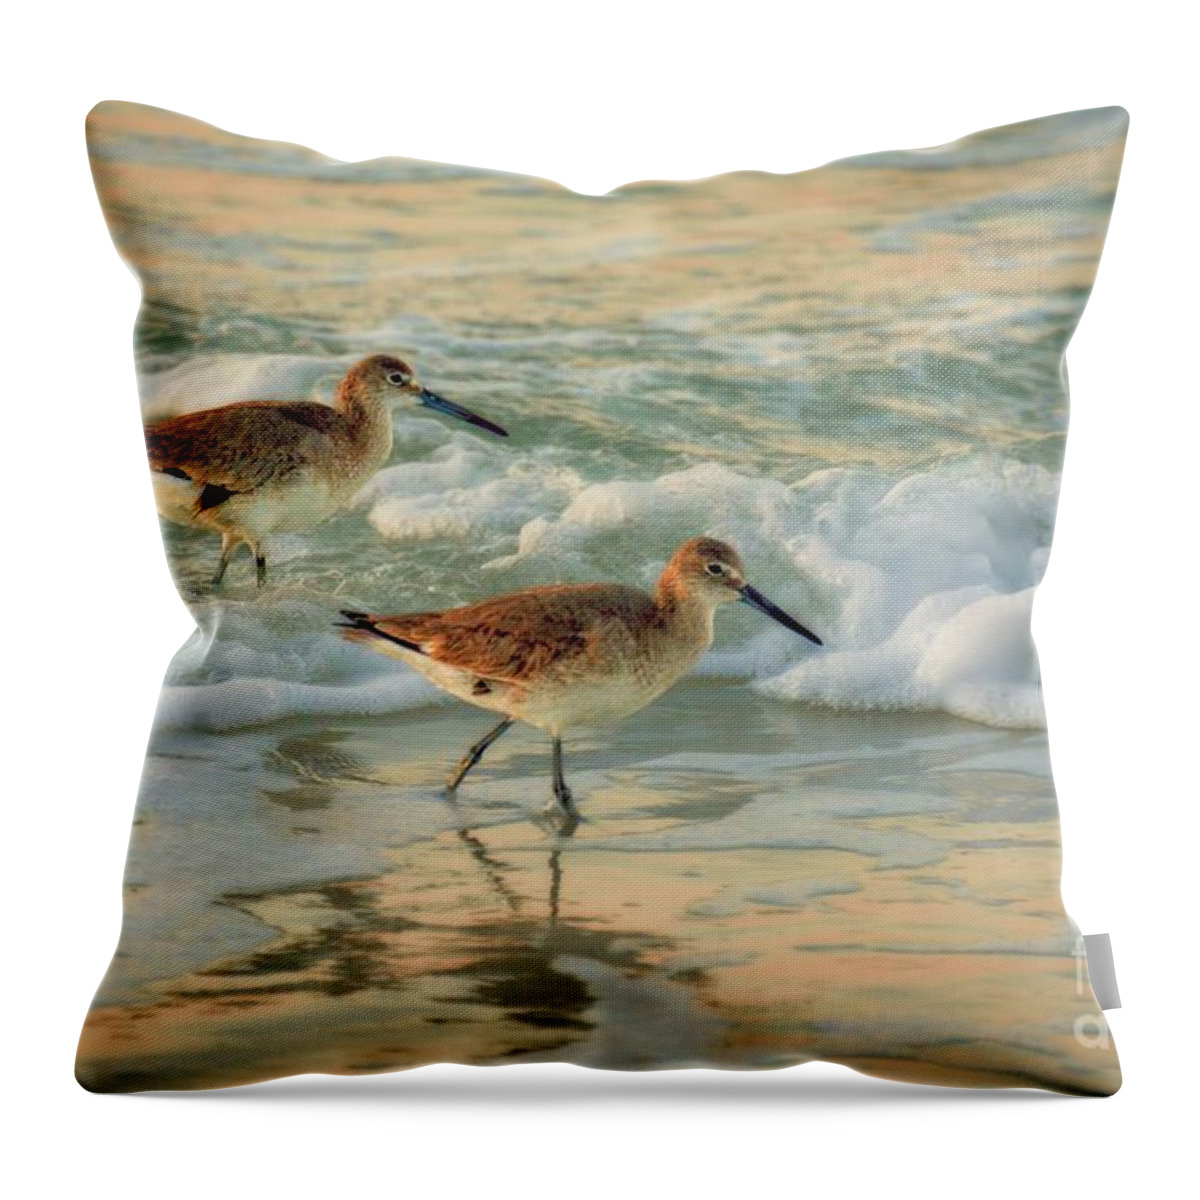 Florida Throw Pillow featuring the photograph Florida Sandpiper Dawn by Henry Kowalski